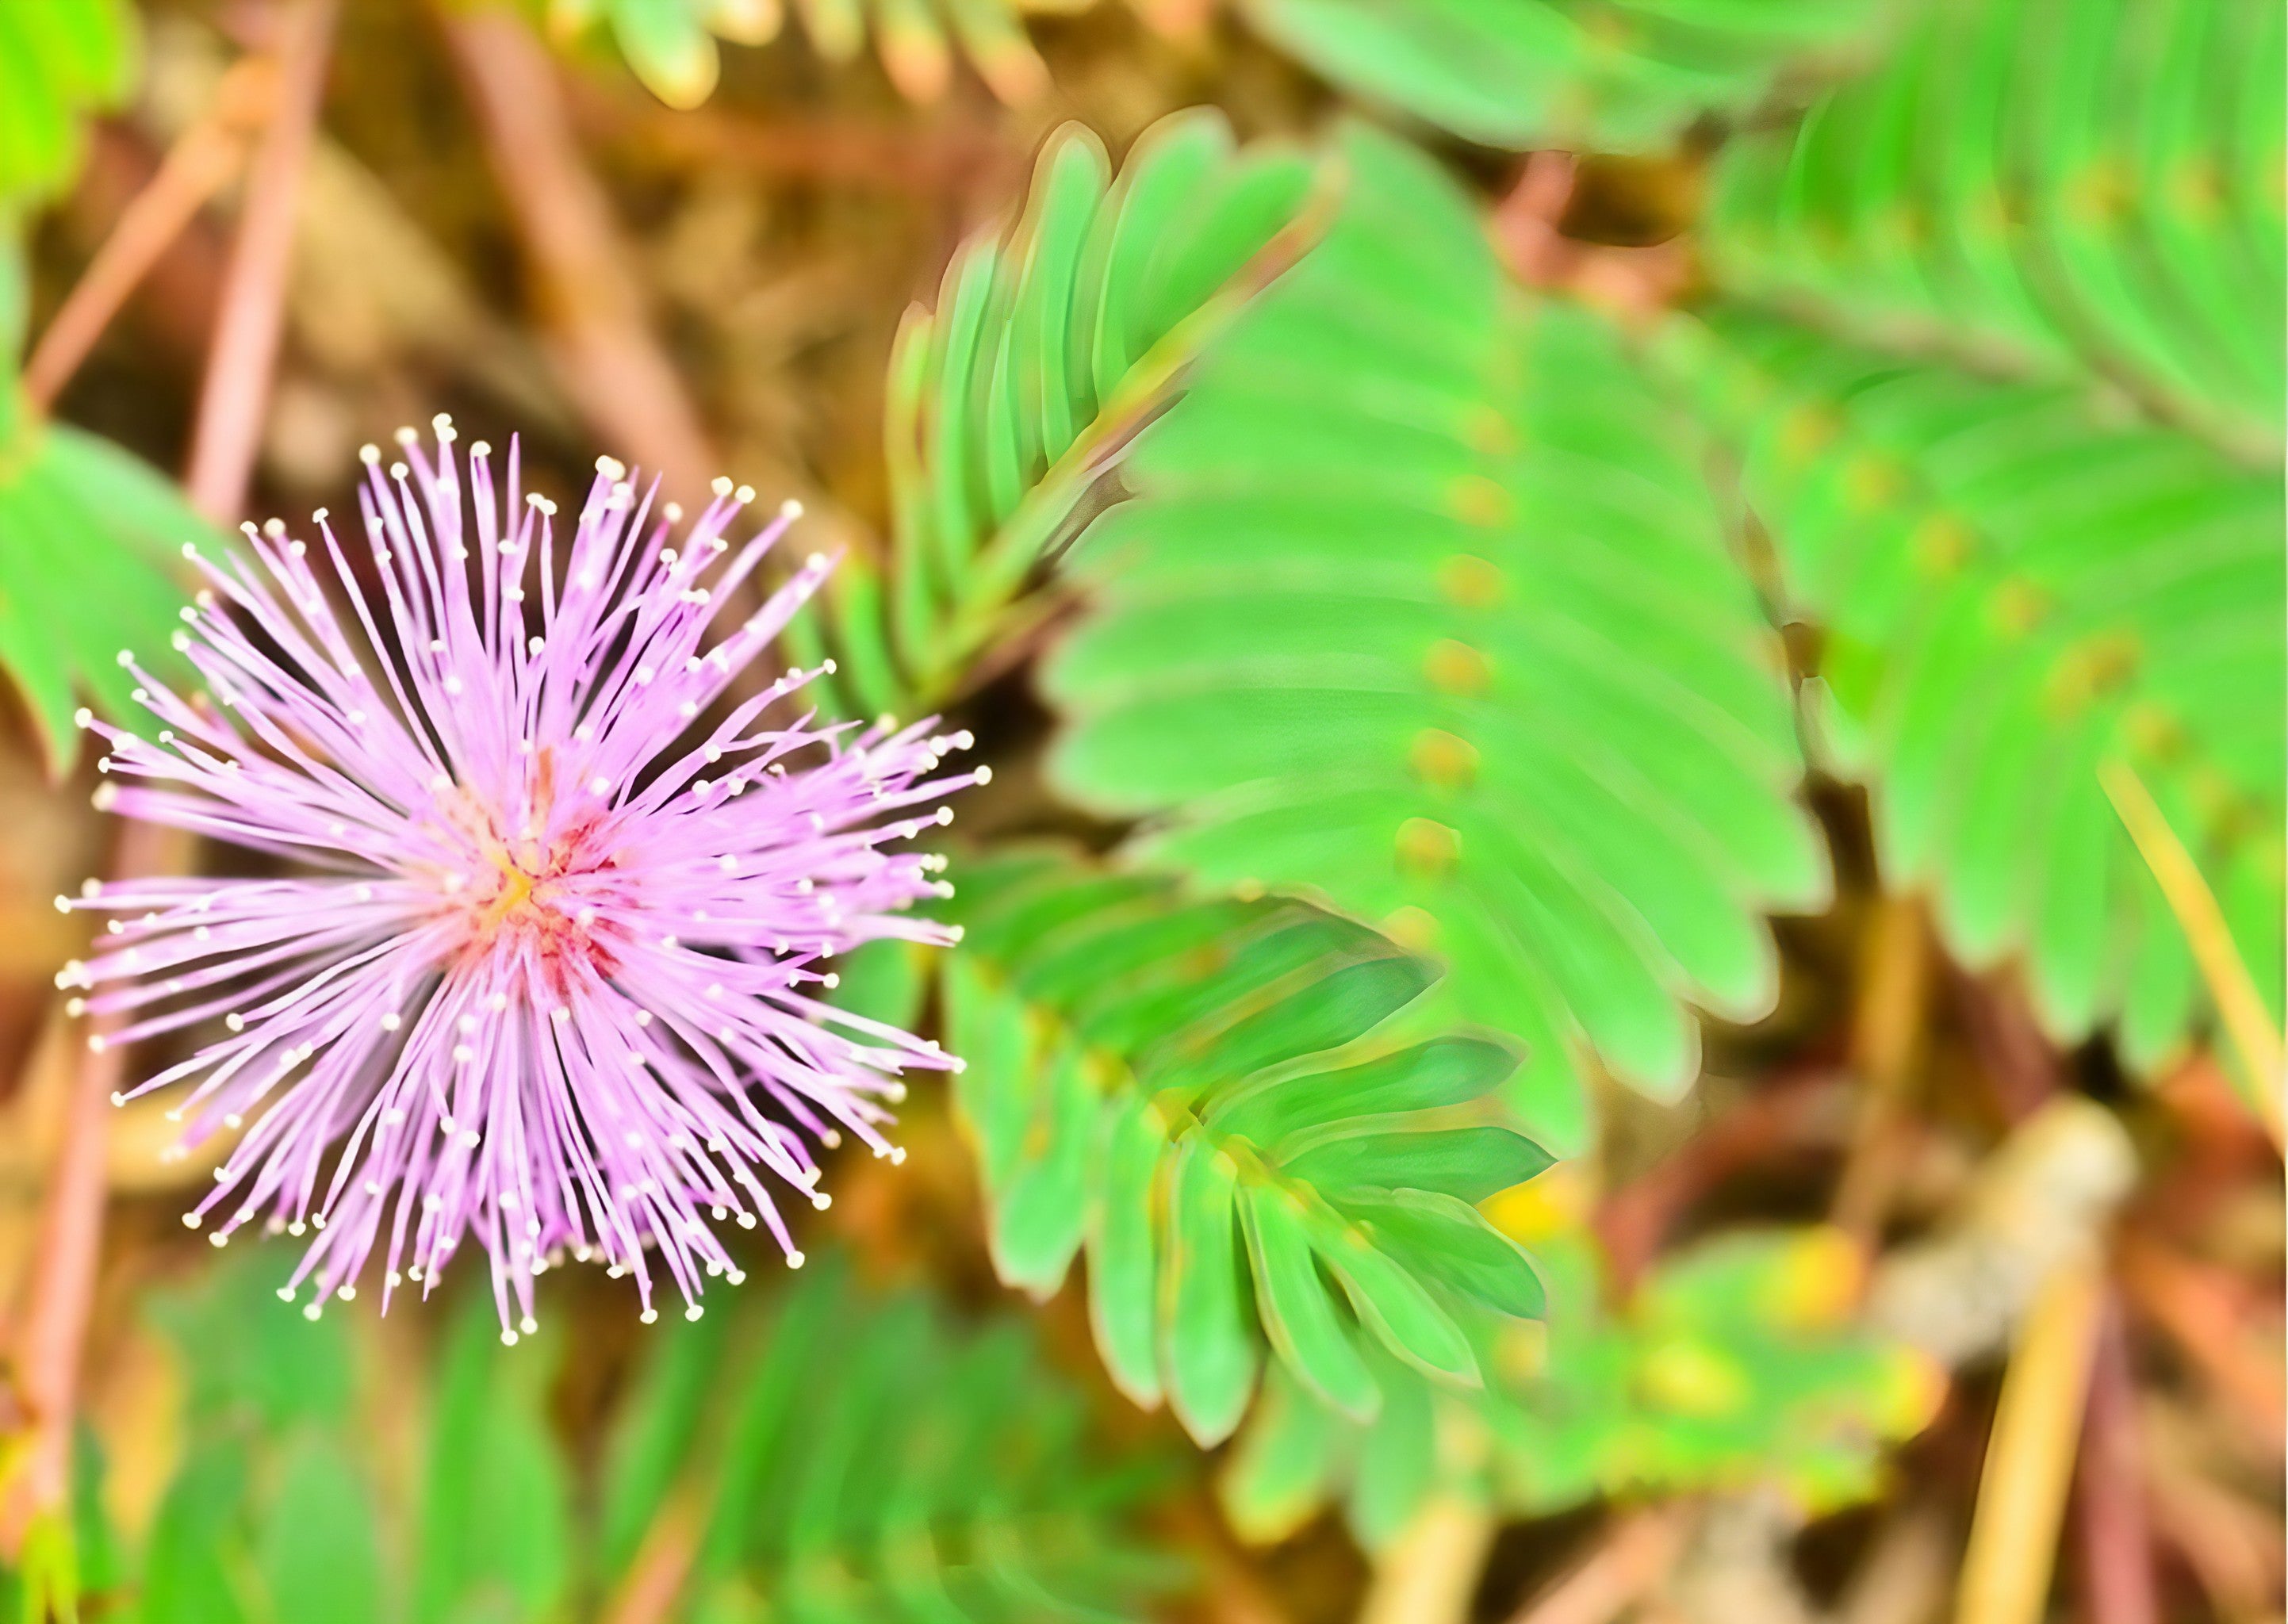 Single Mimosa Pudica bloom with purple petals in a grassy field